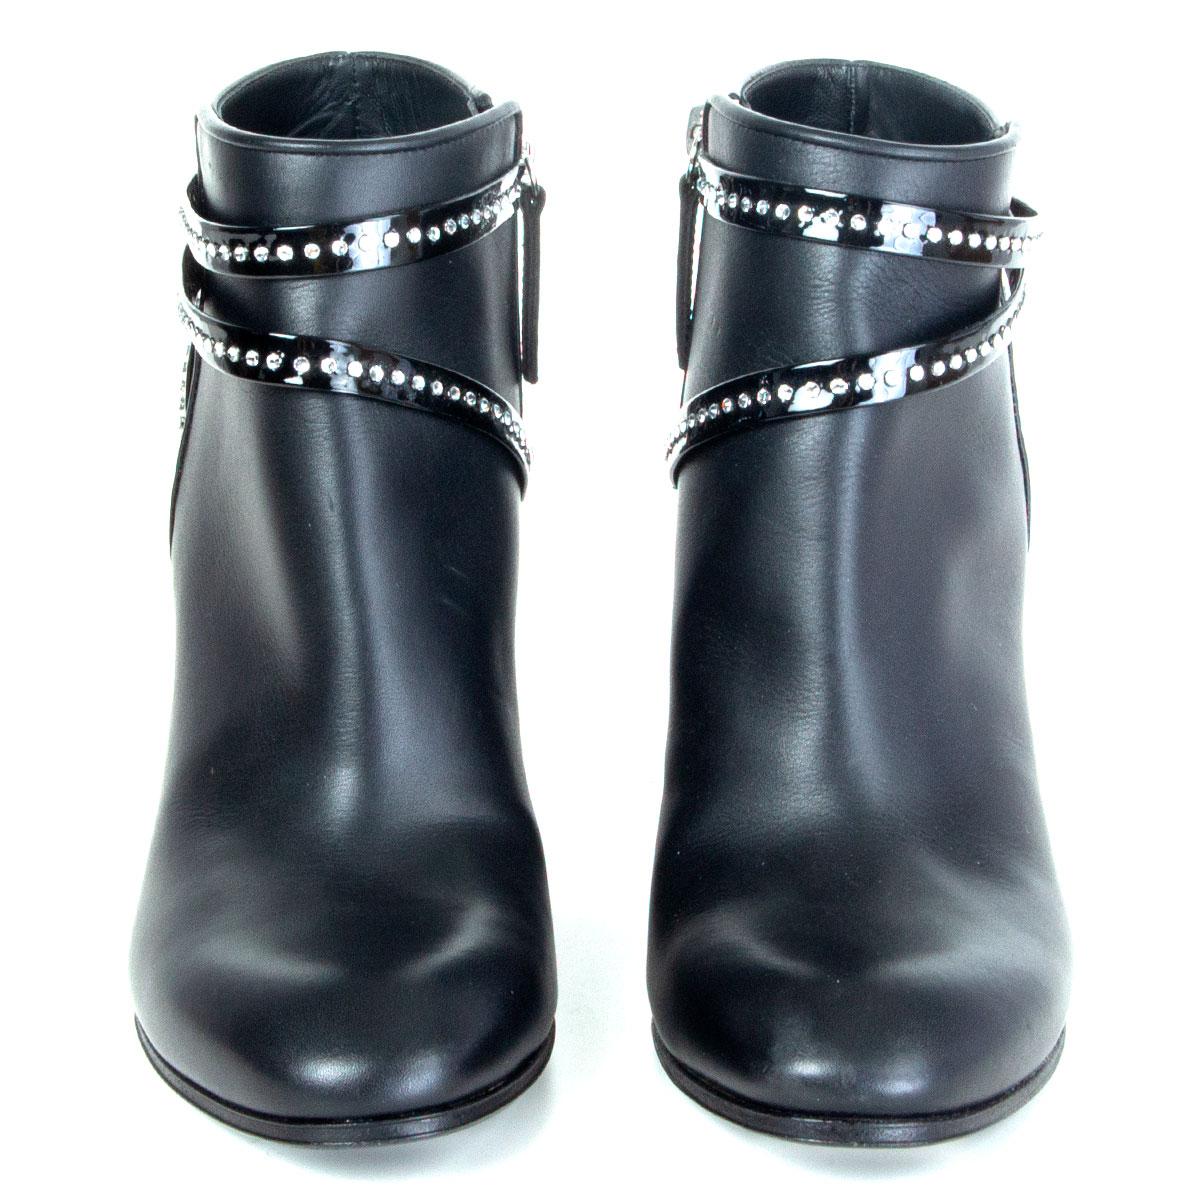 authentic Giuseppe Zanotti ankle-boots in black calfskin with rhinestone embellished patent leather straps around the ankle. Open with a zipper on the inside. Brand new. 

Imprinted Size 37
Shoe Size 37
Inside Sole 24.5cm (9.6in)
Width 7.5cm